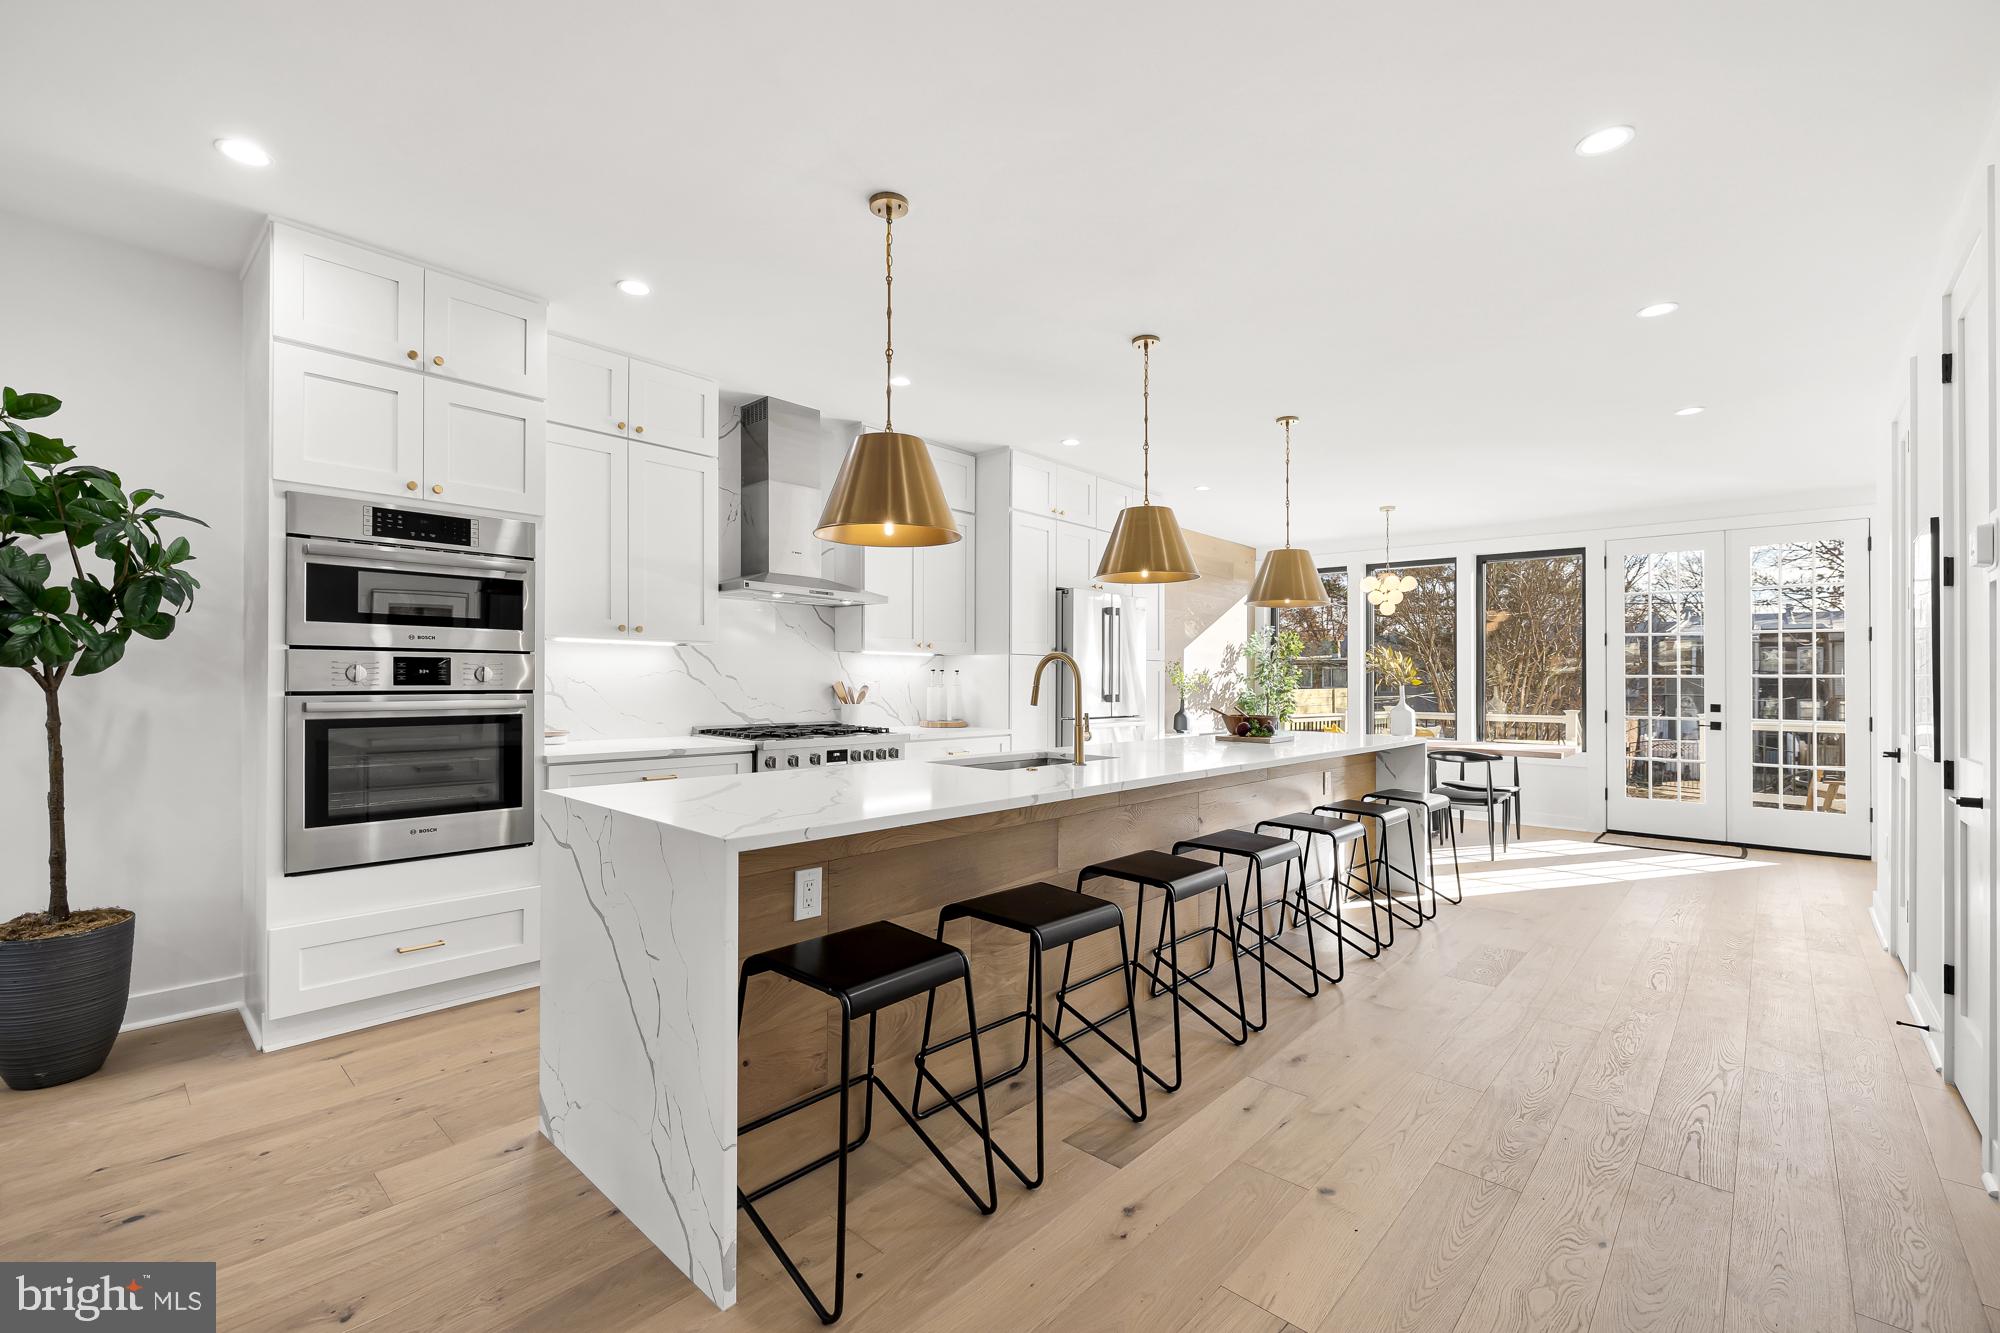 a open kitchen with stainless steel appliances kitchen island granite countertop a stove a sink a refrigerator and a dining table with wooden floor